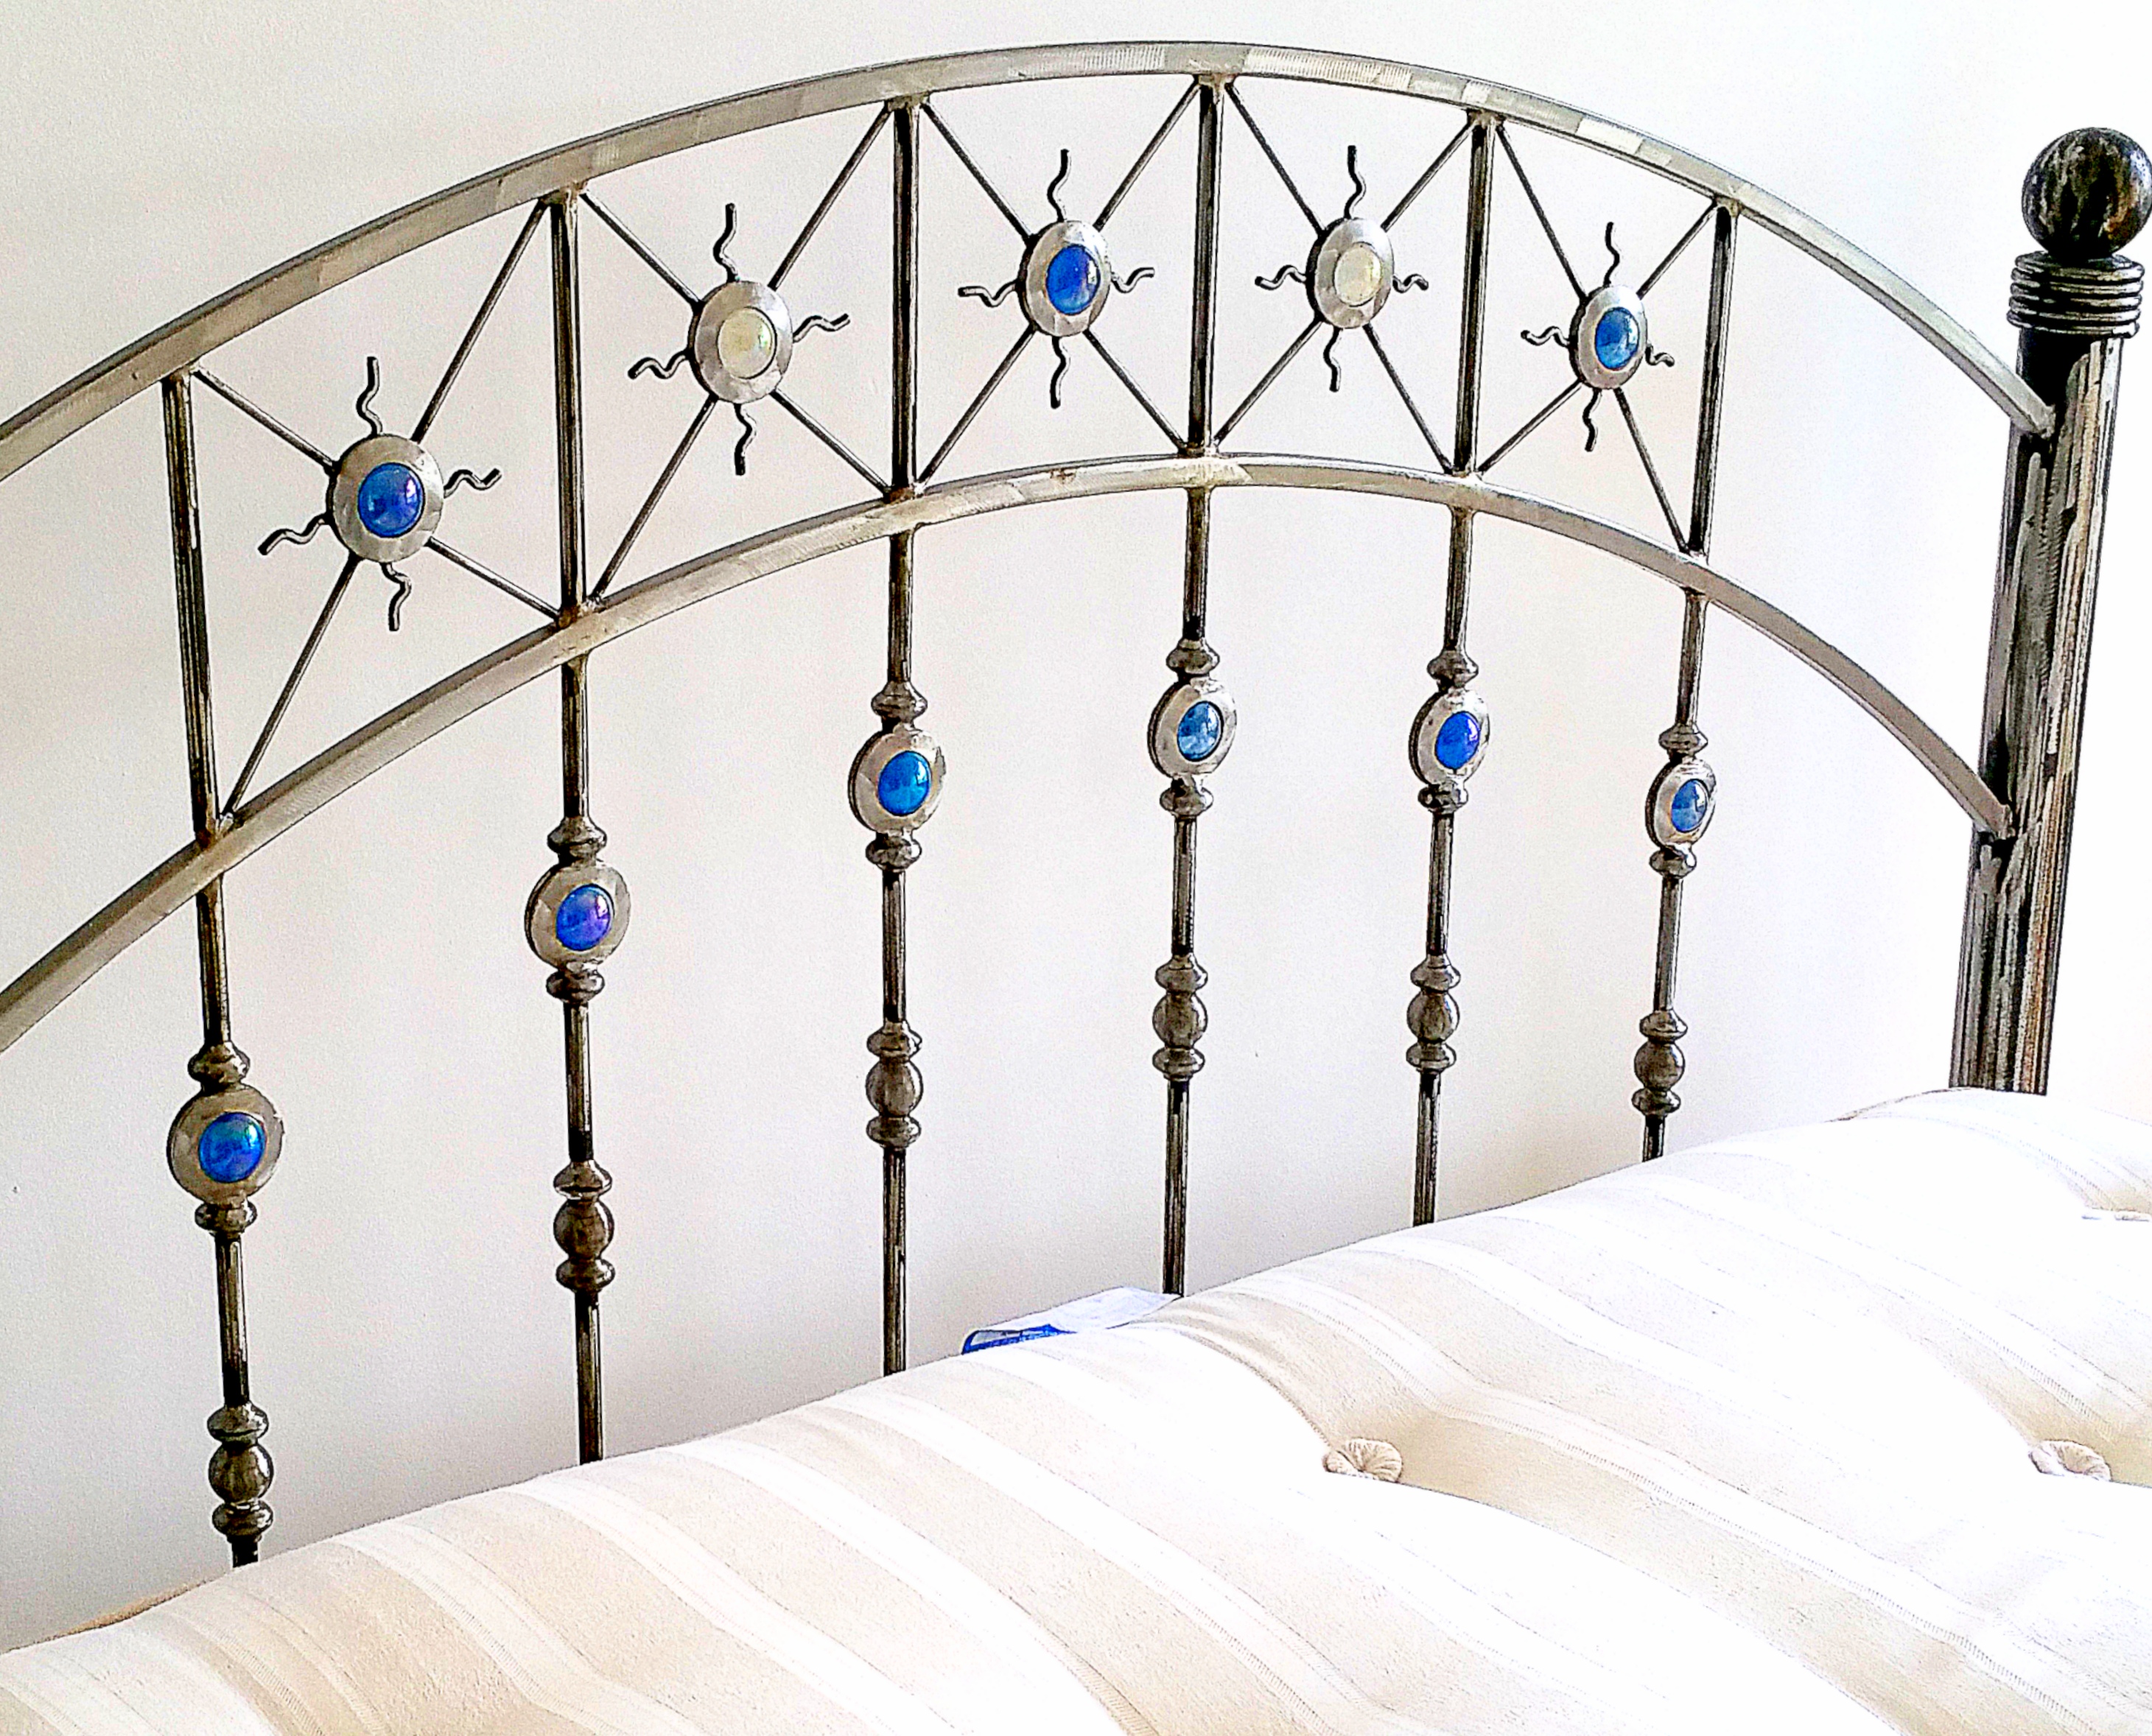 Handmade metal bed ,with  glass balls